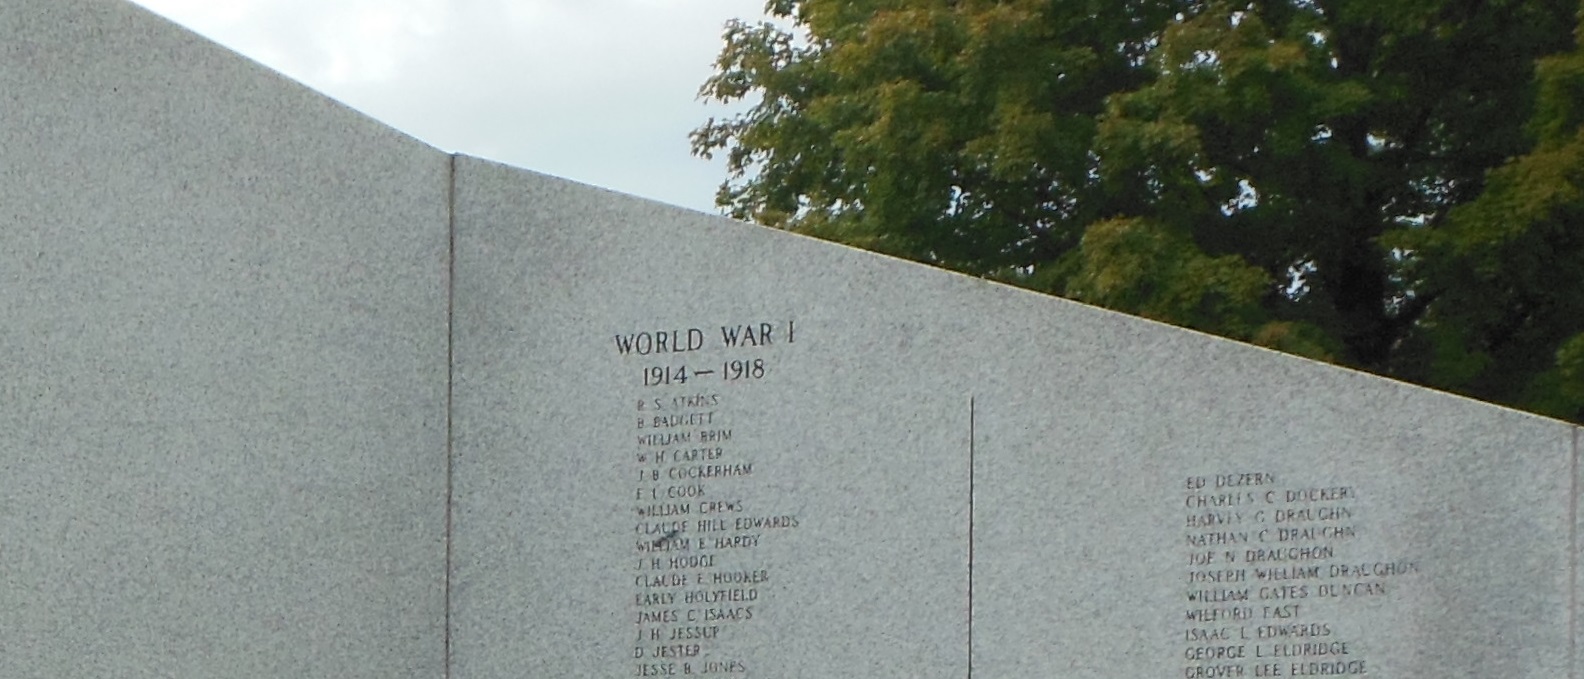 World War I memorials in Mt. Airy, NC. (Anthony C. Hayes)